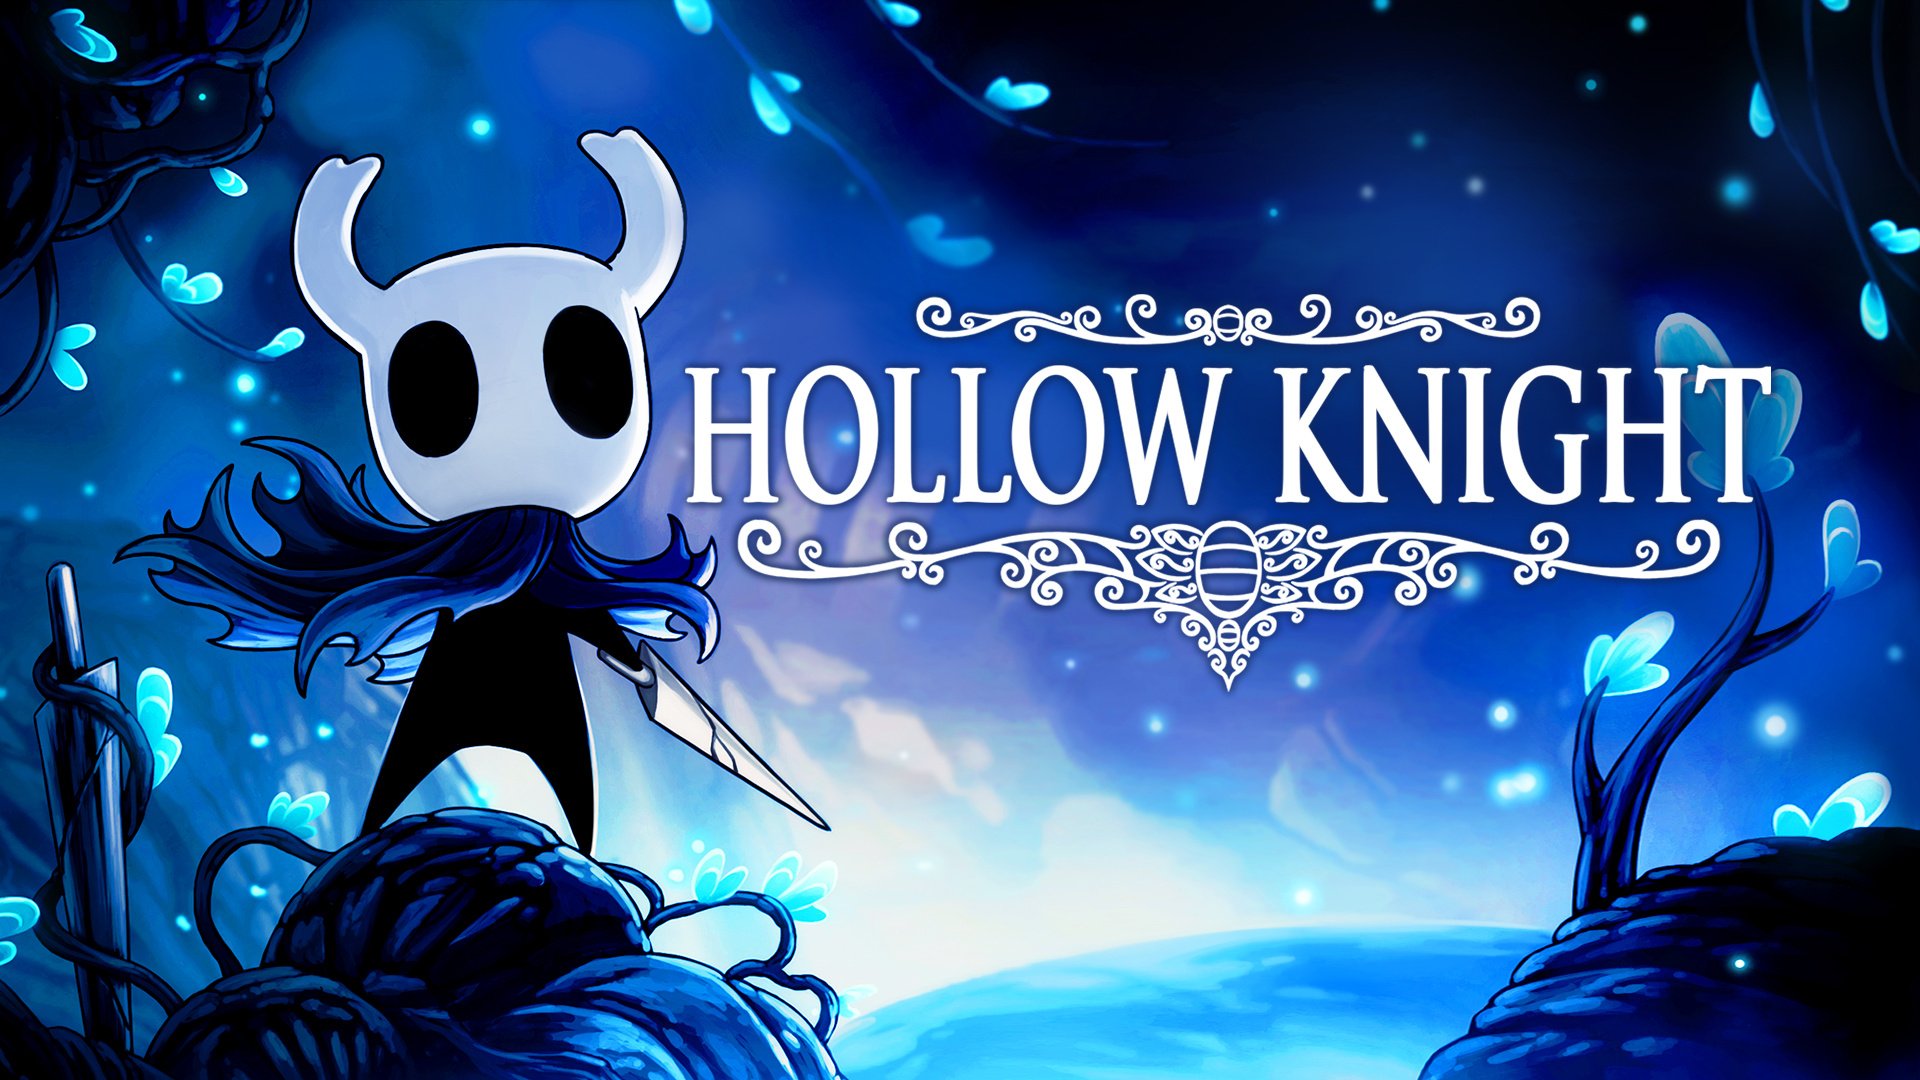 Hollow Knight Notch Upgrades & Charms Locations - Guide - Nintendo Life